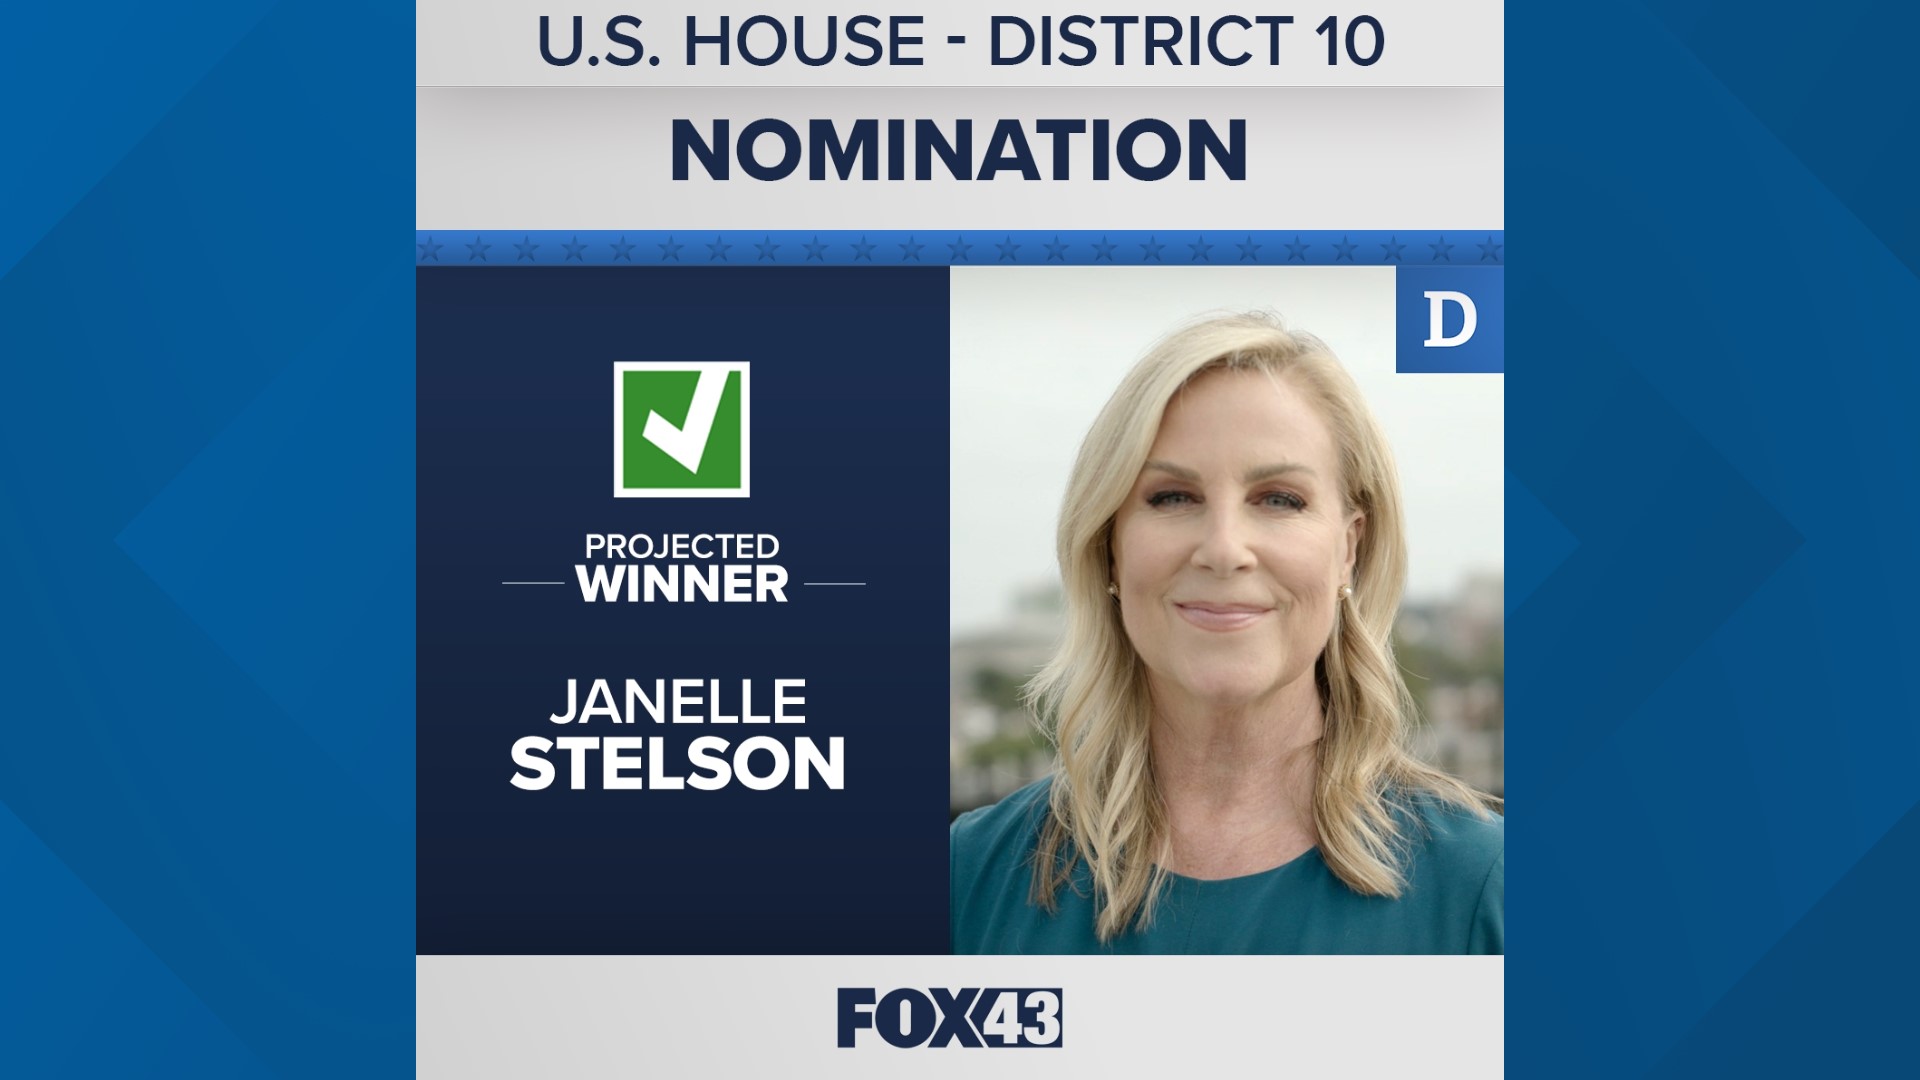 Janelle Stelson emerged from a crowded field to earn the right to run for the office, and face Republican Scott Perry in Pennsylvania's General Election.